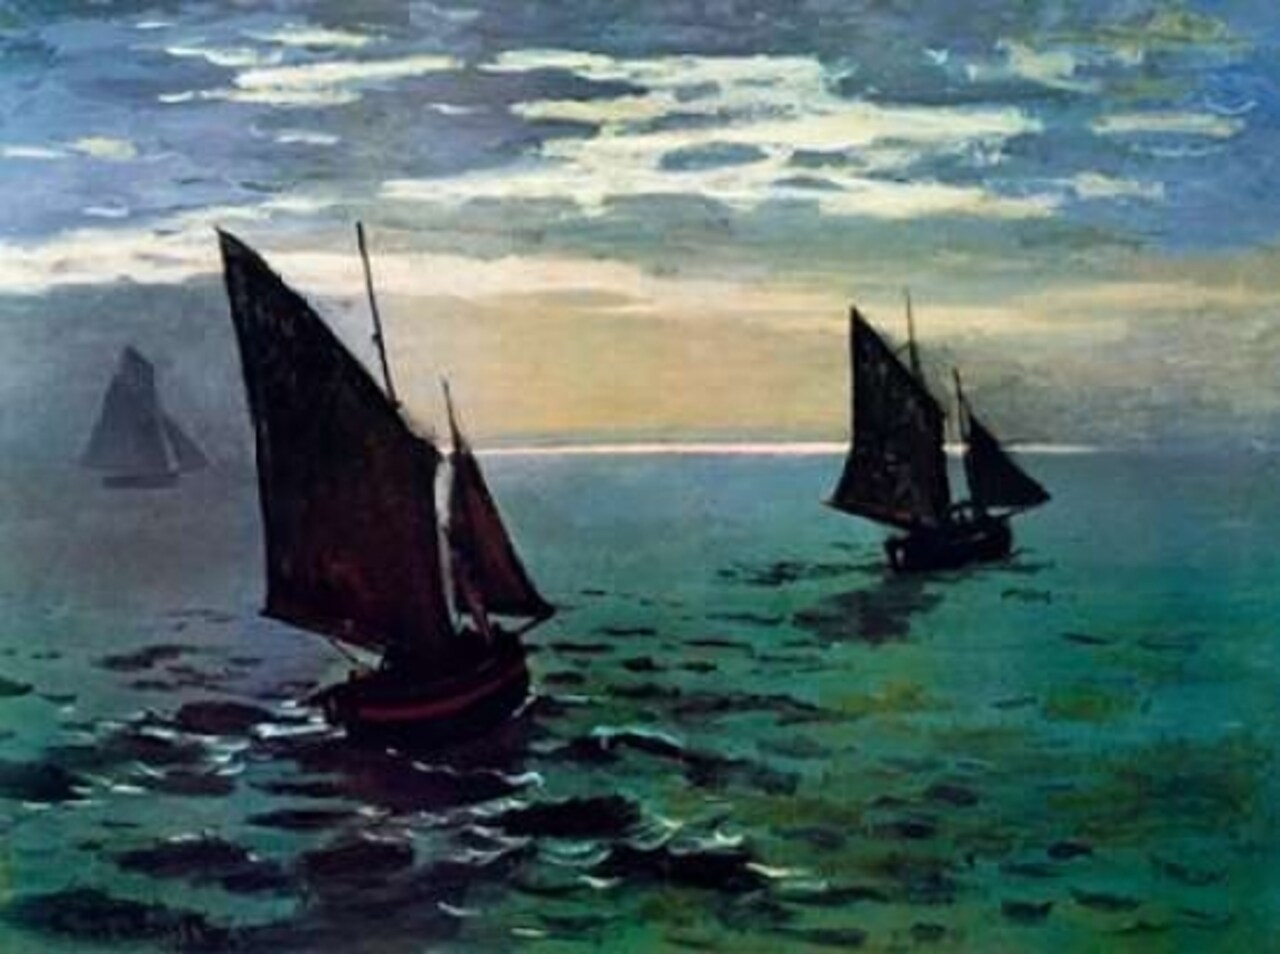 Boats Leaving The Harbor Poster Print by  Claude Monet - Item # VARPDX373760